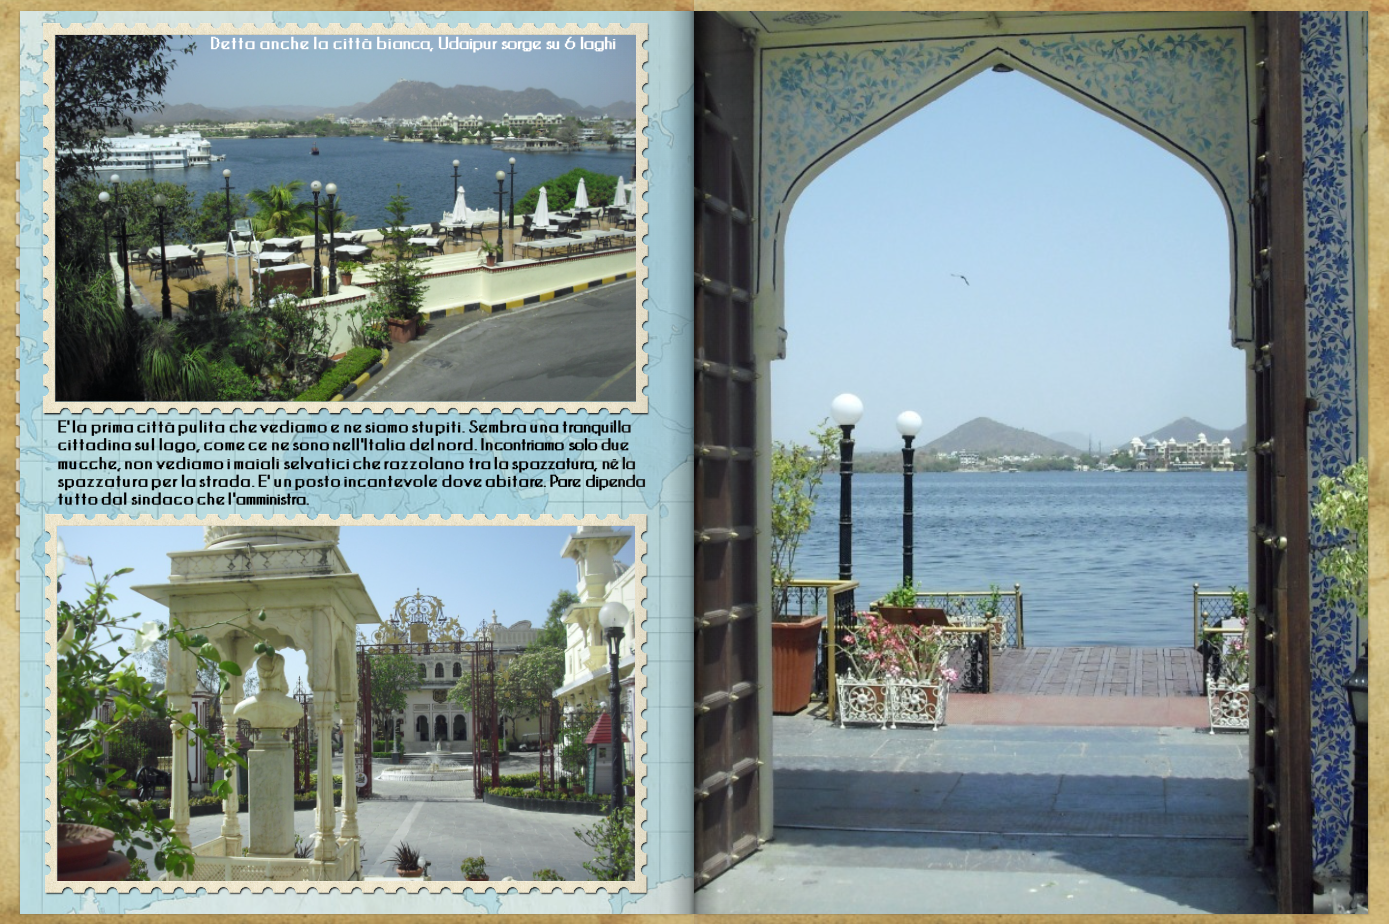 India pag 29